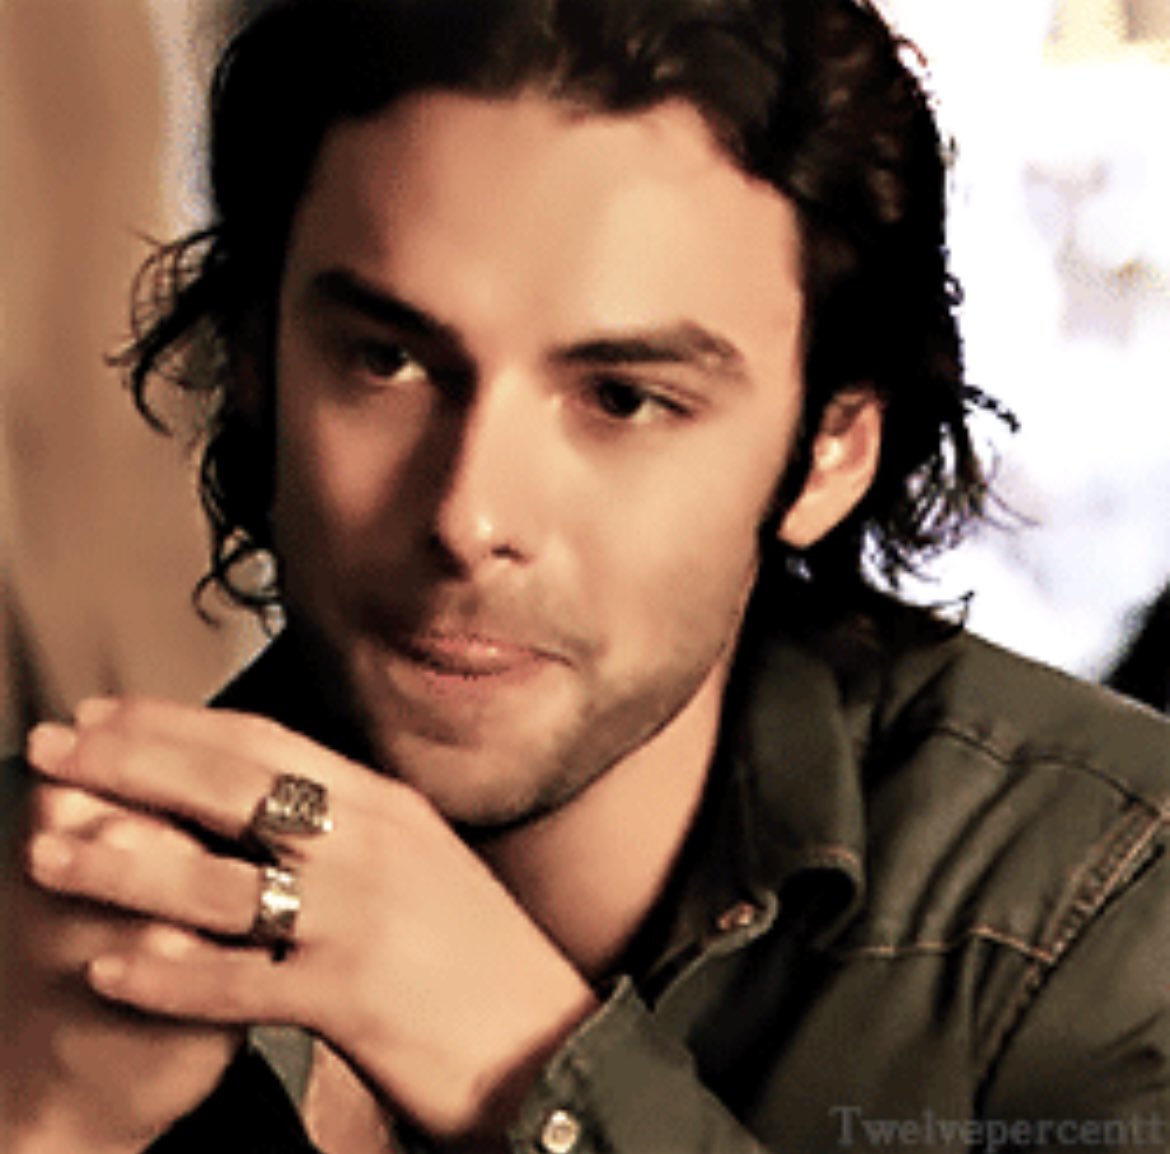 Hope it’s a fantastic start to everyone’s week. Happy #MitchellMonday #AidanTurner #AidanCrew #BeingHumanUK (Photo credit to owner and TwelvePercent) 🩵